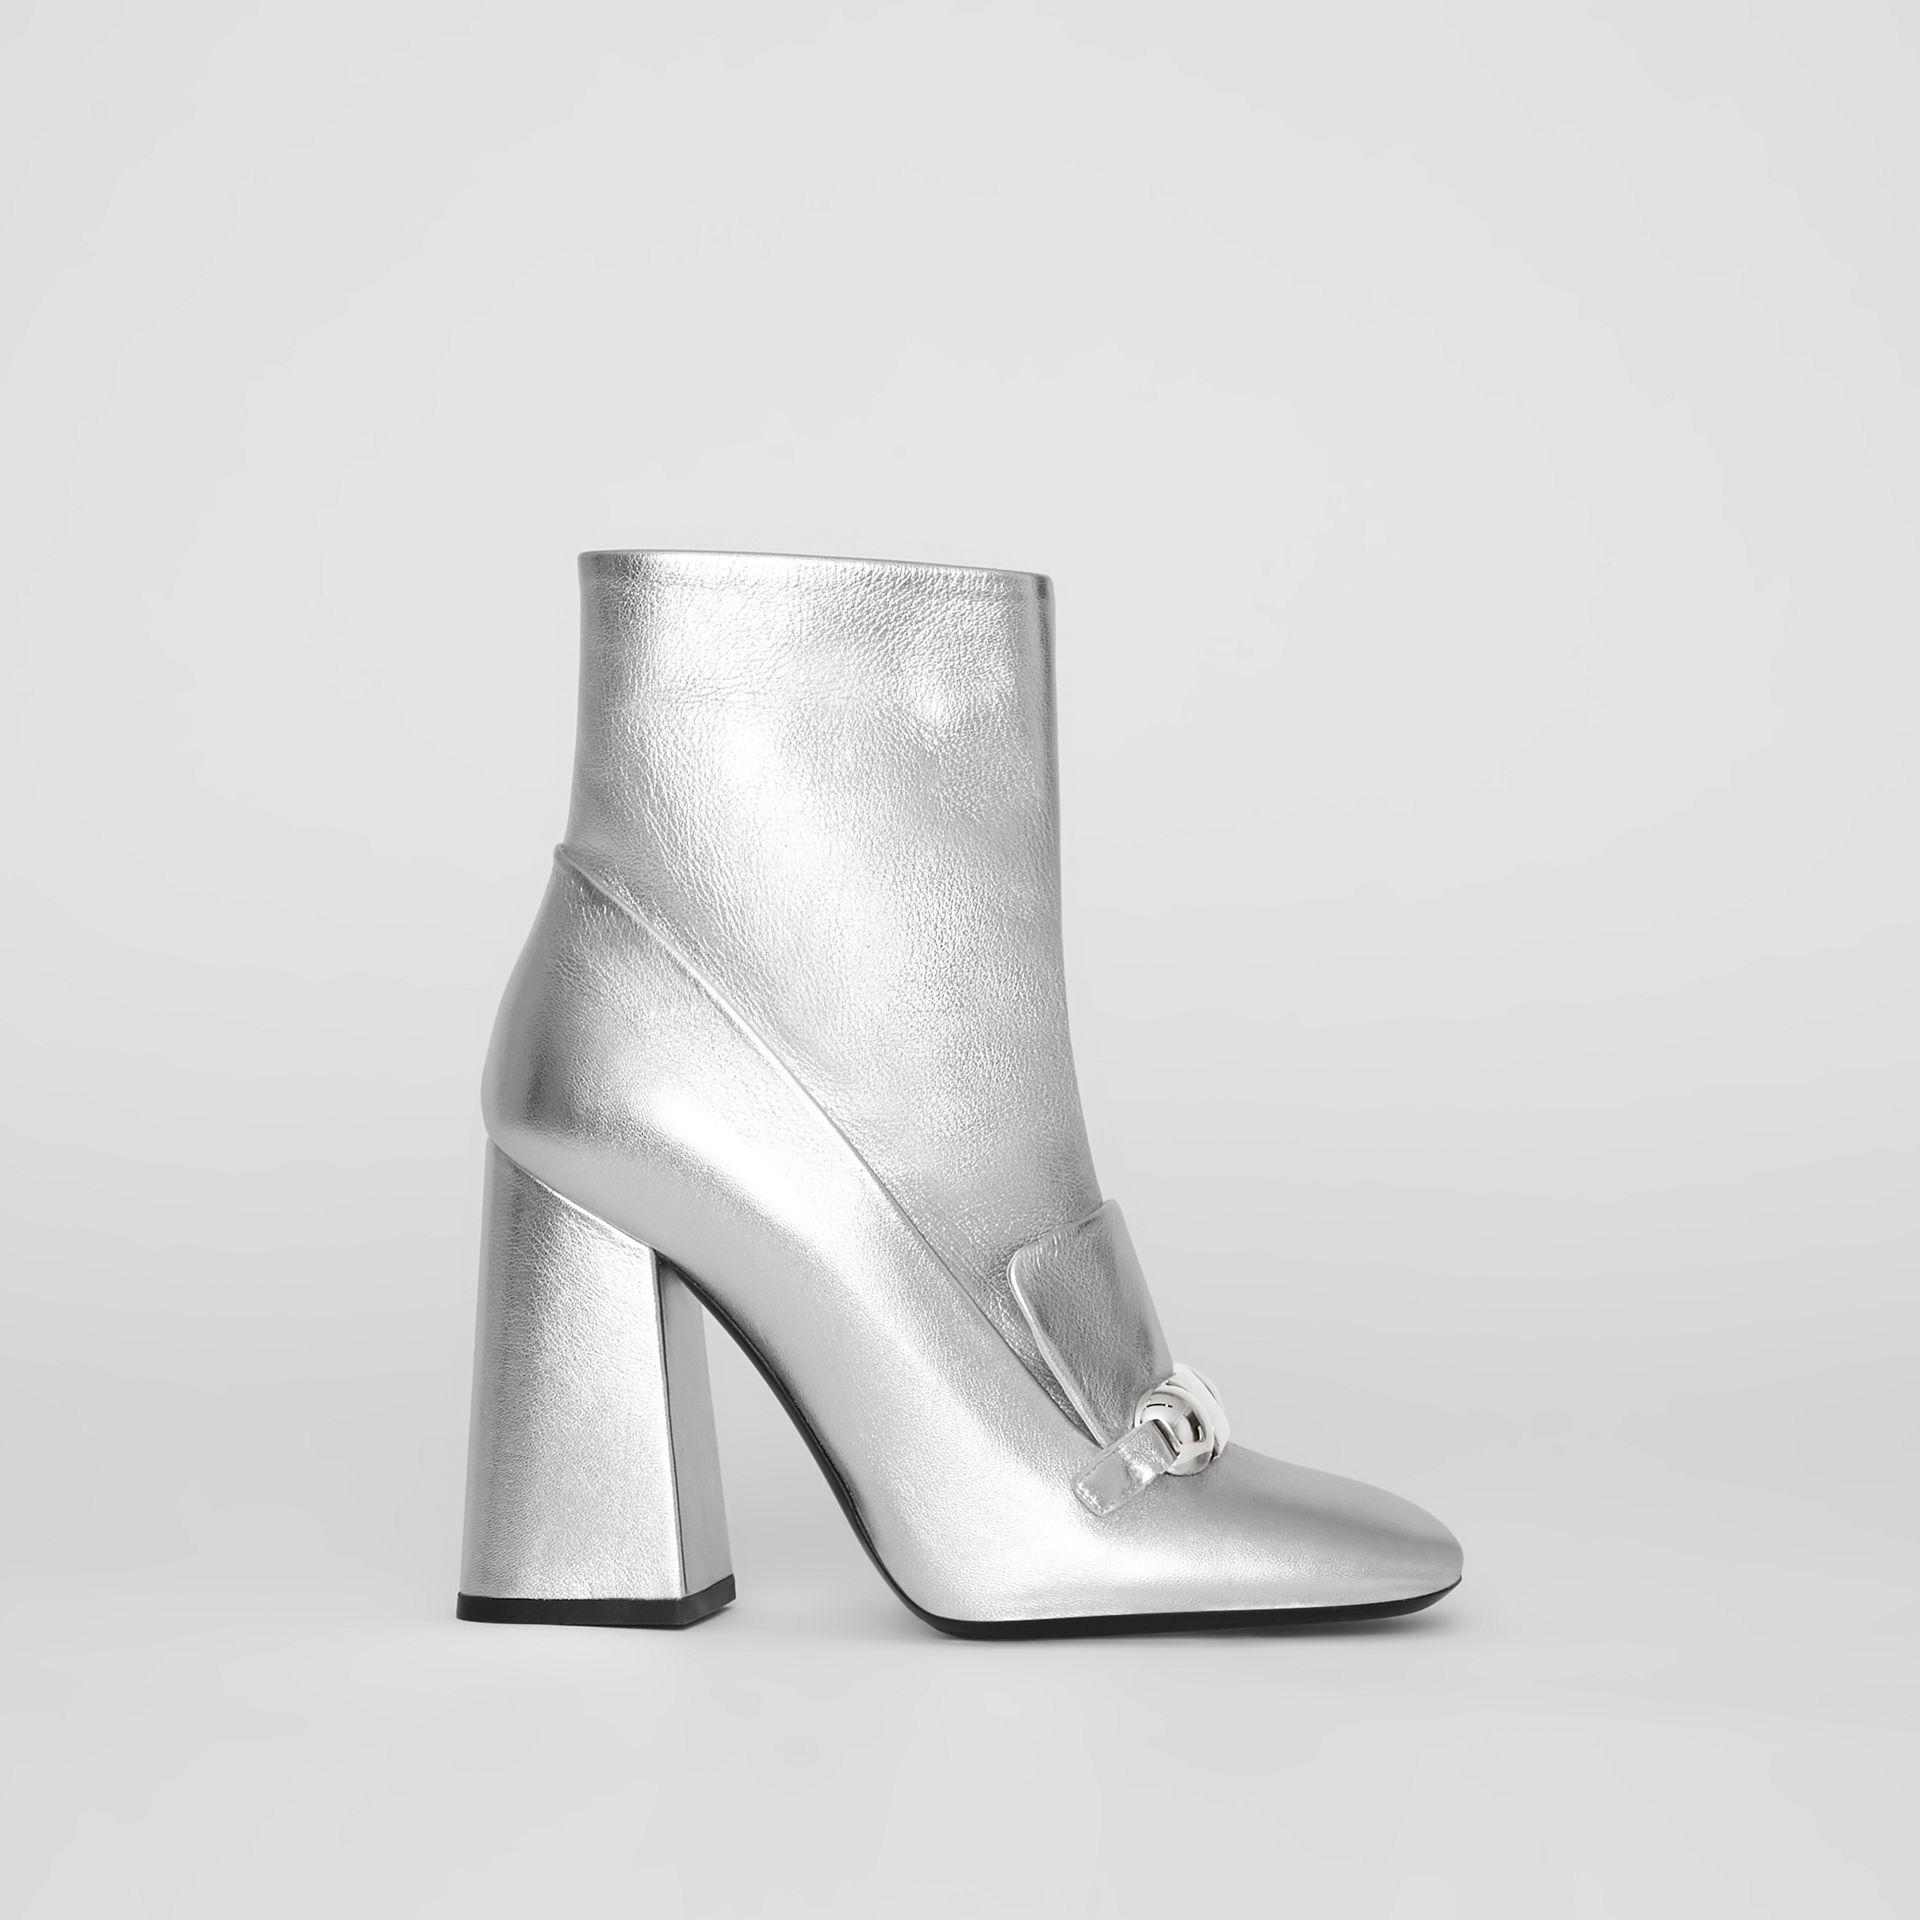 burberry boots silver